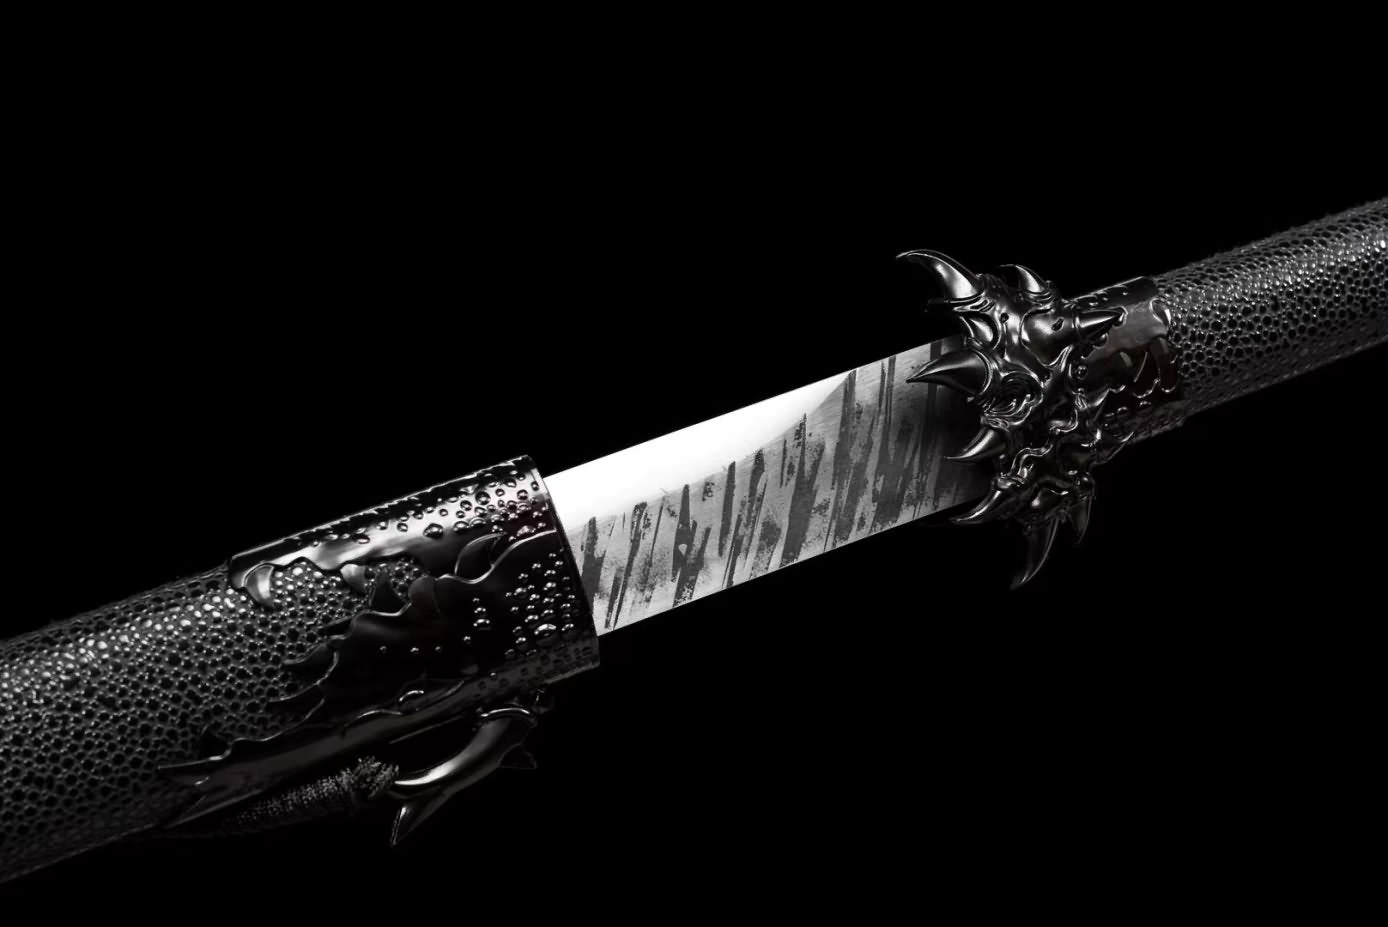 Tang dao Swords Real,High Carbon Steel Blades,Alloy Fittings,PU Scabbard,LOONGSWORD